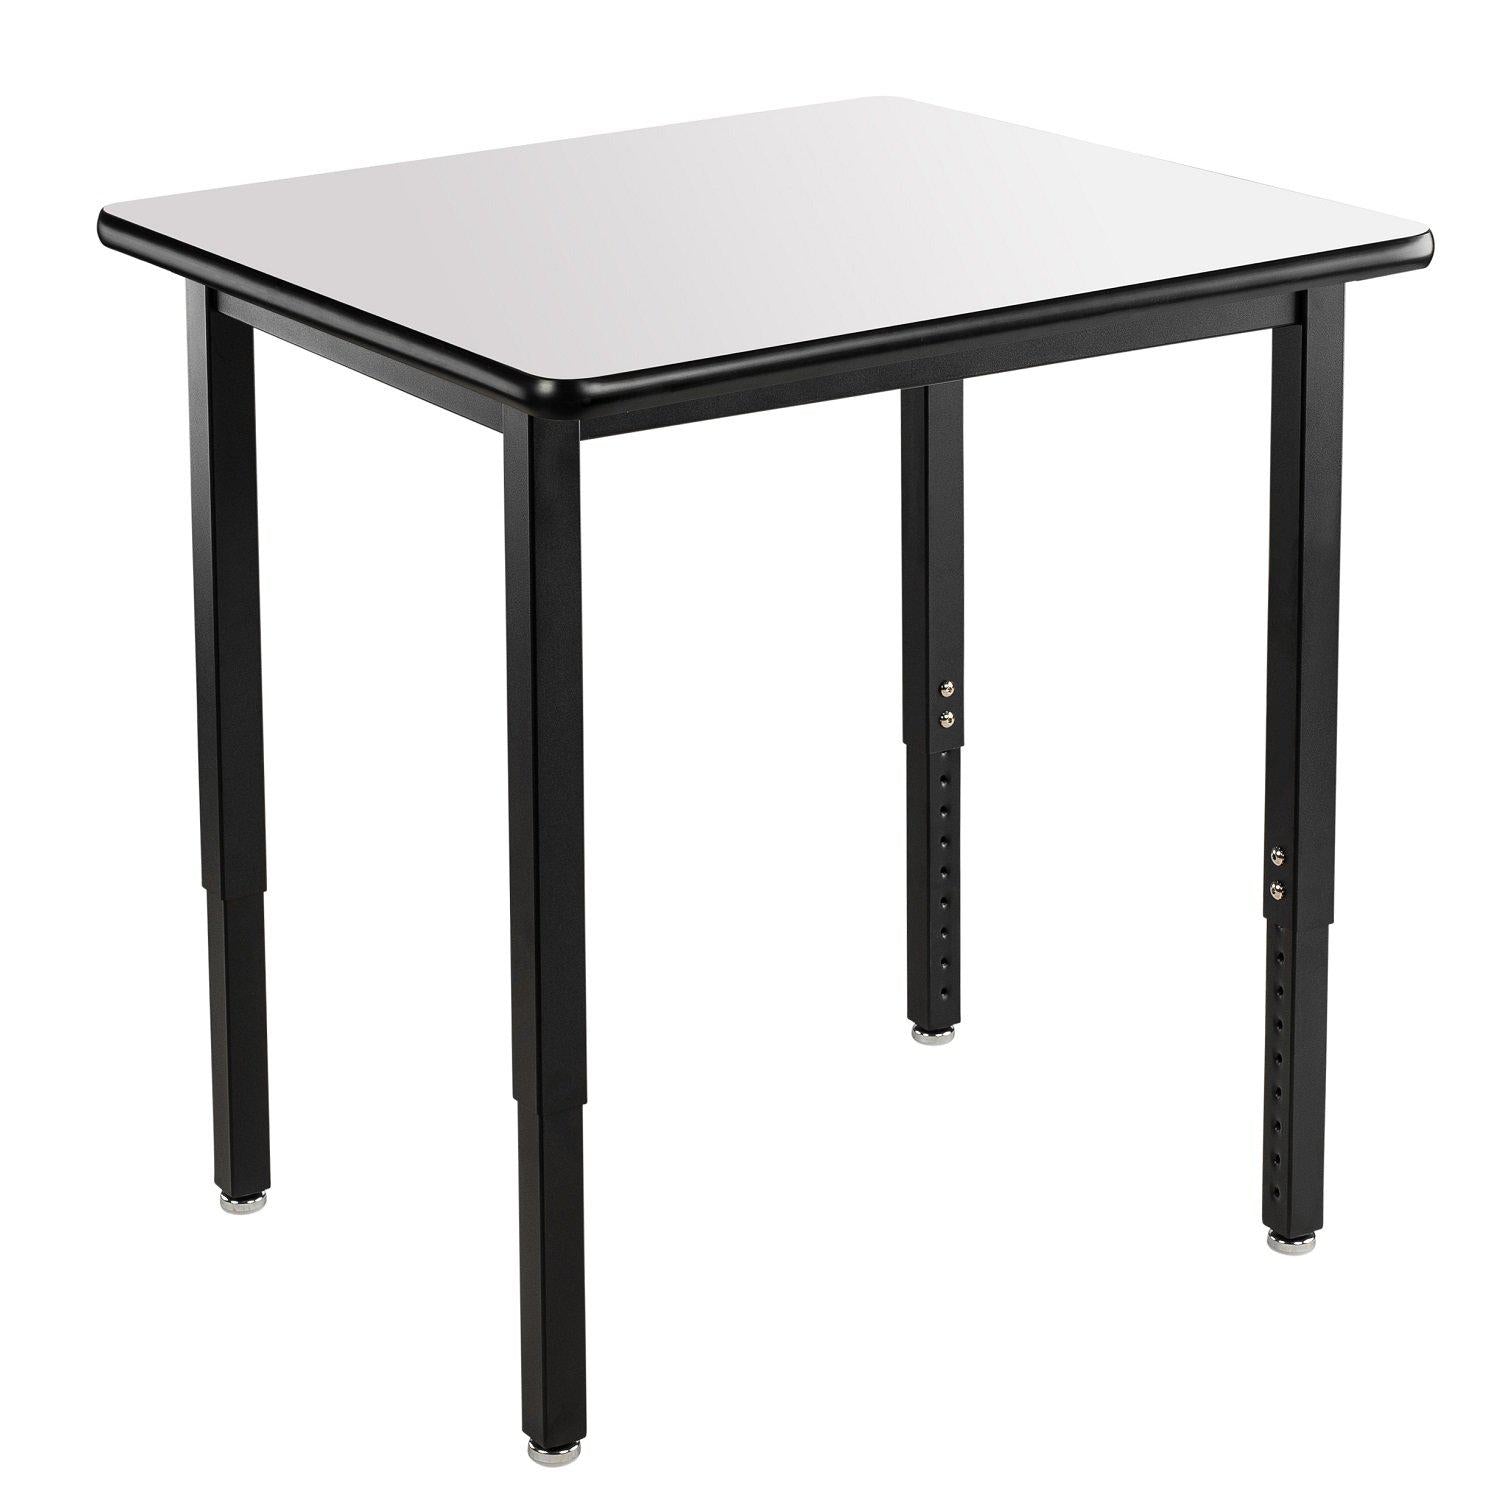 Heavy-Duty Height-Adjustable Utility Table, Black Frame, 24" x 24", Whiteboard High-Pressure Laminate Top